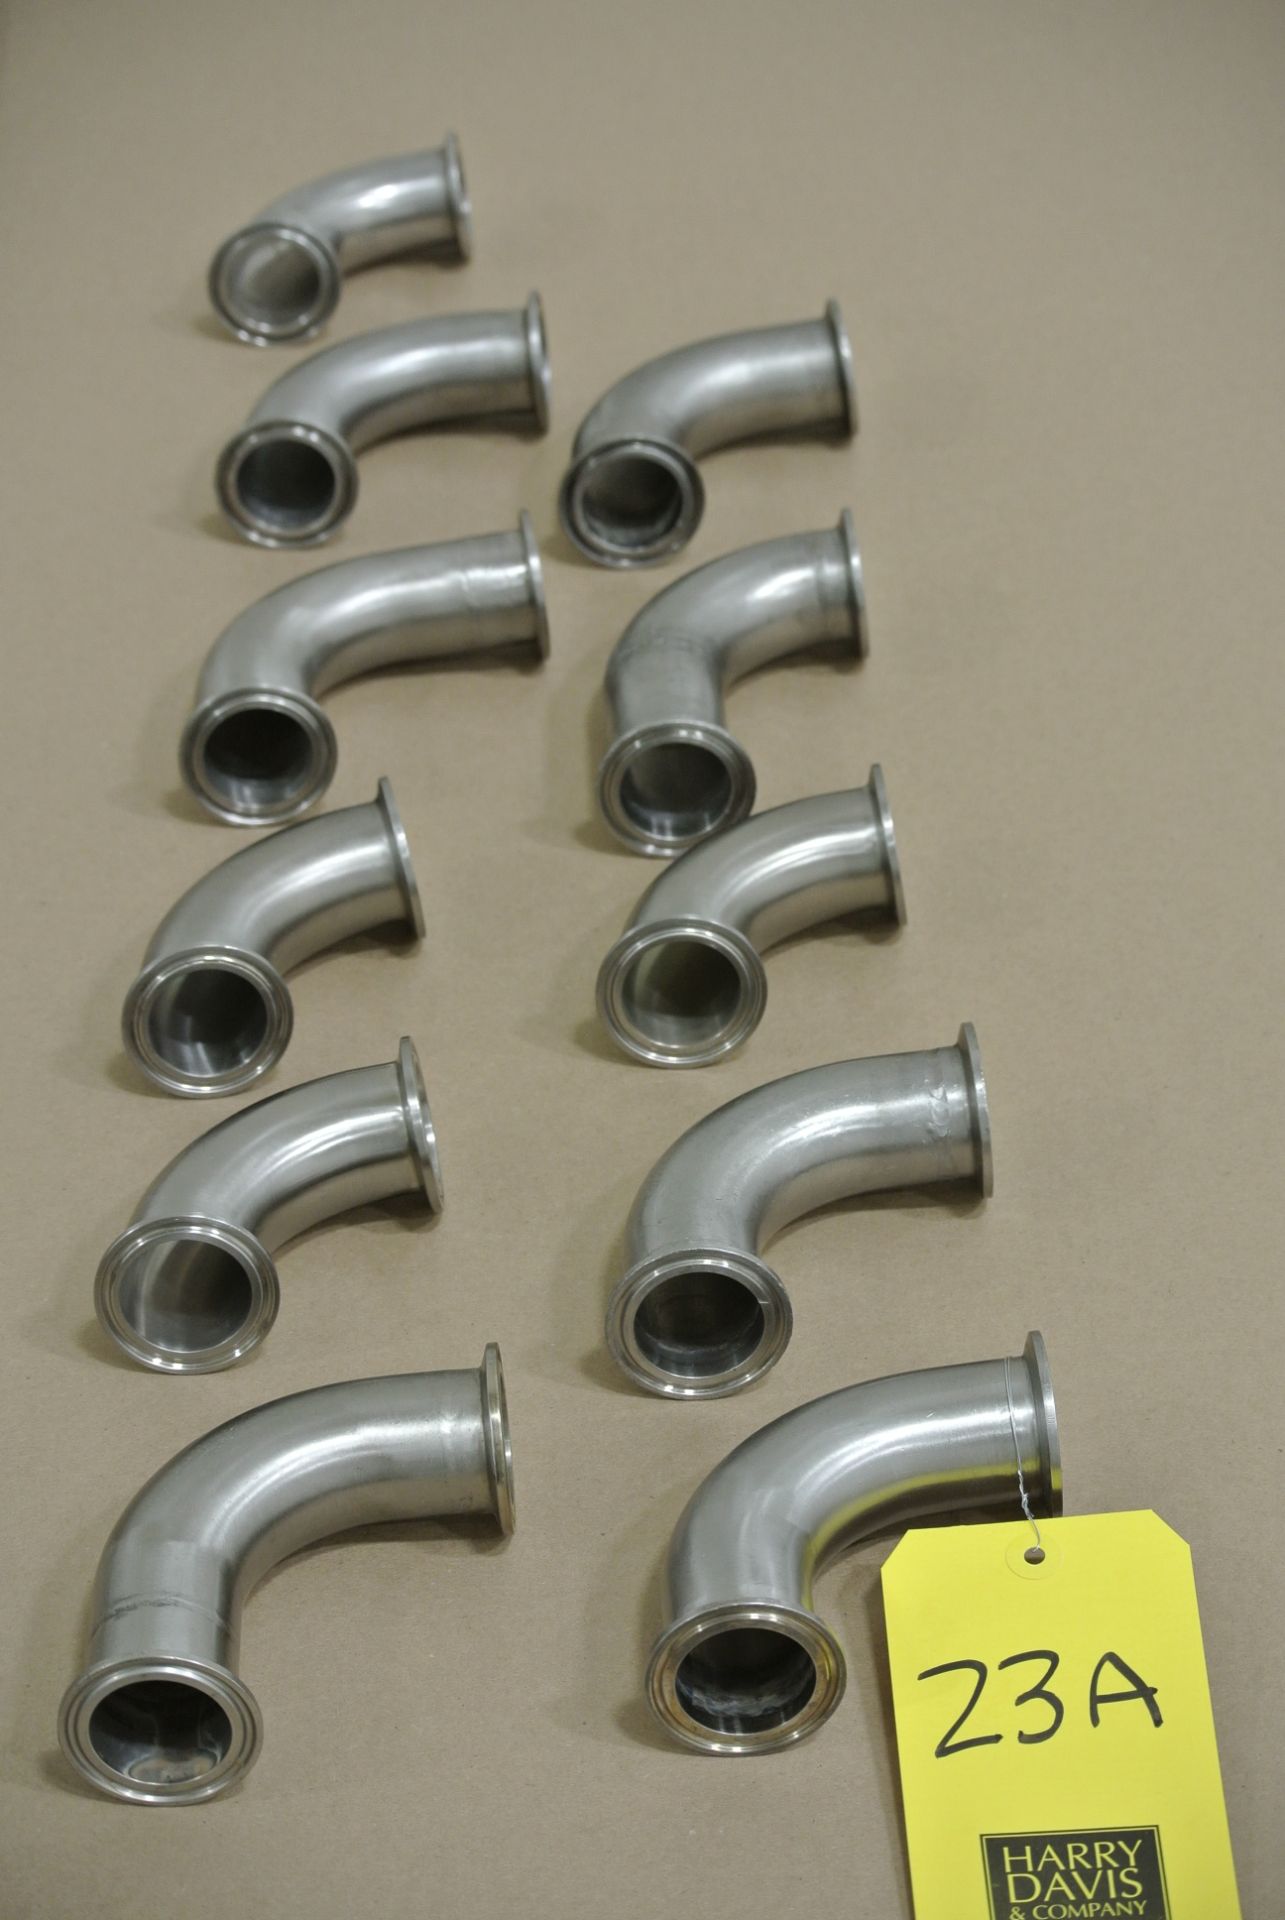 1 1/2" S/S Elbows Rigging Fee $ 15